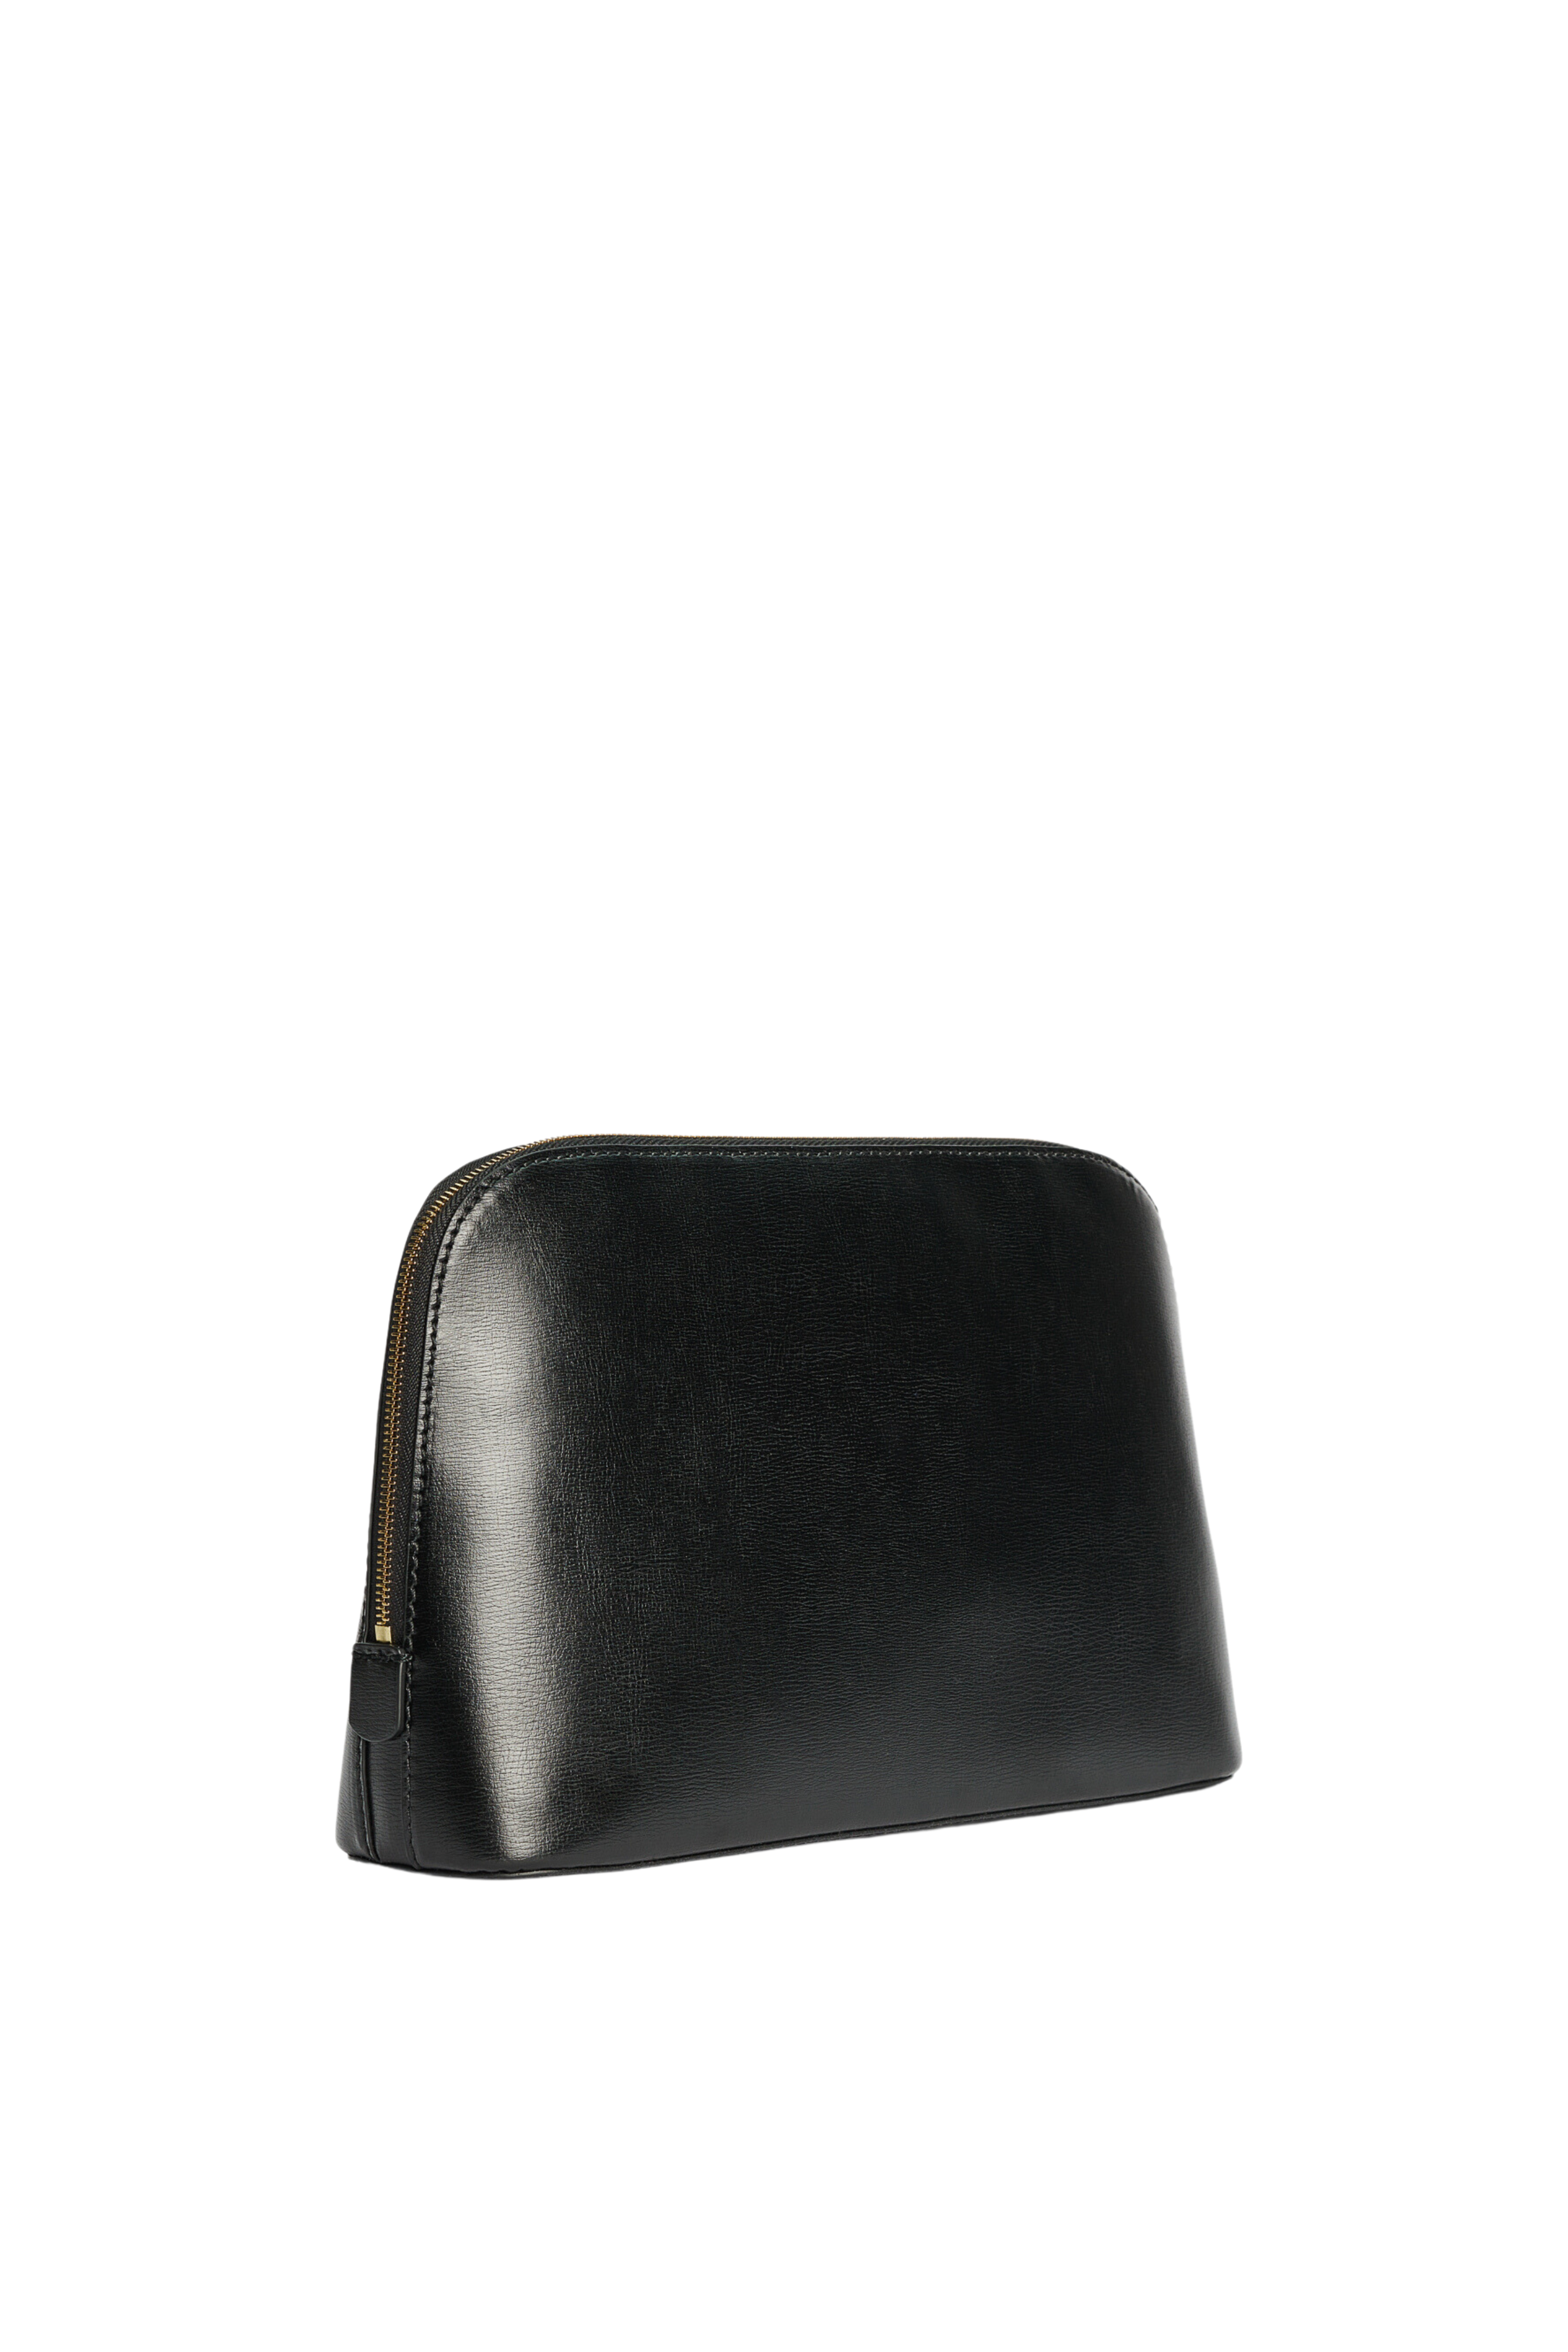 BY MALENE BIRGER Aya Black Travel Leather Makeup Pouch